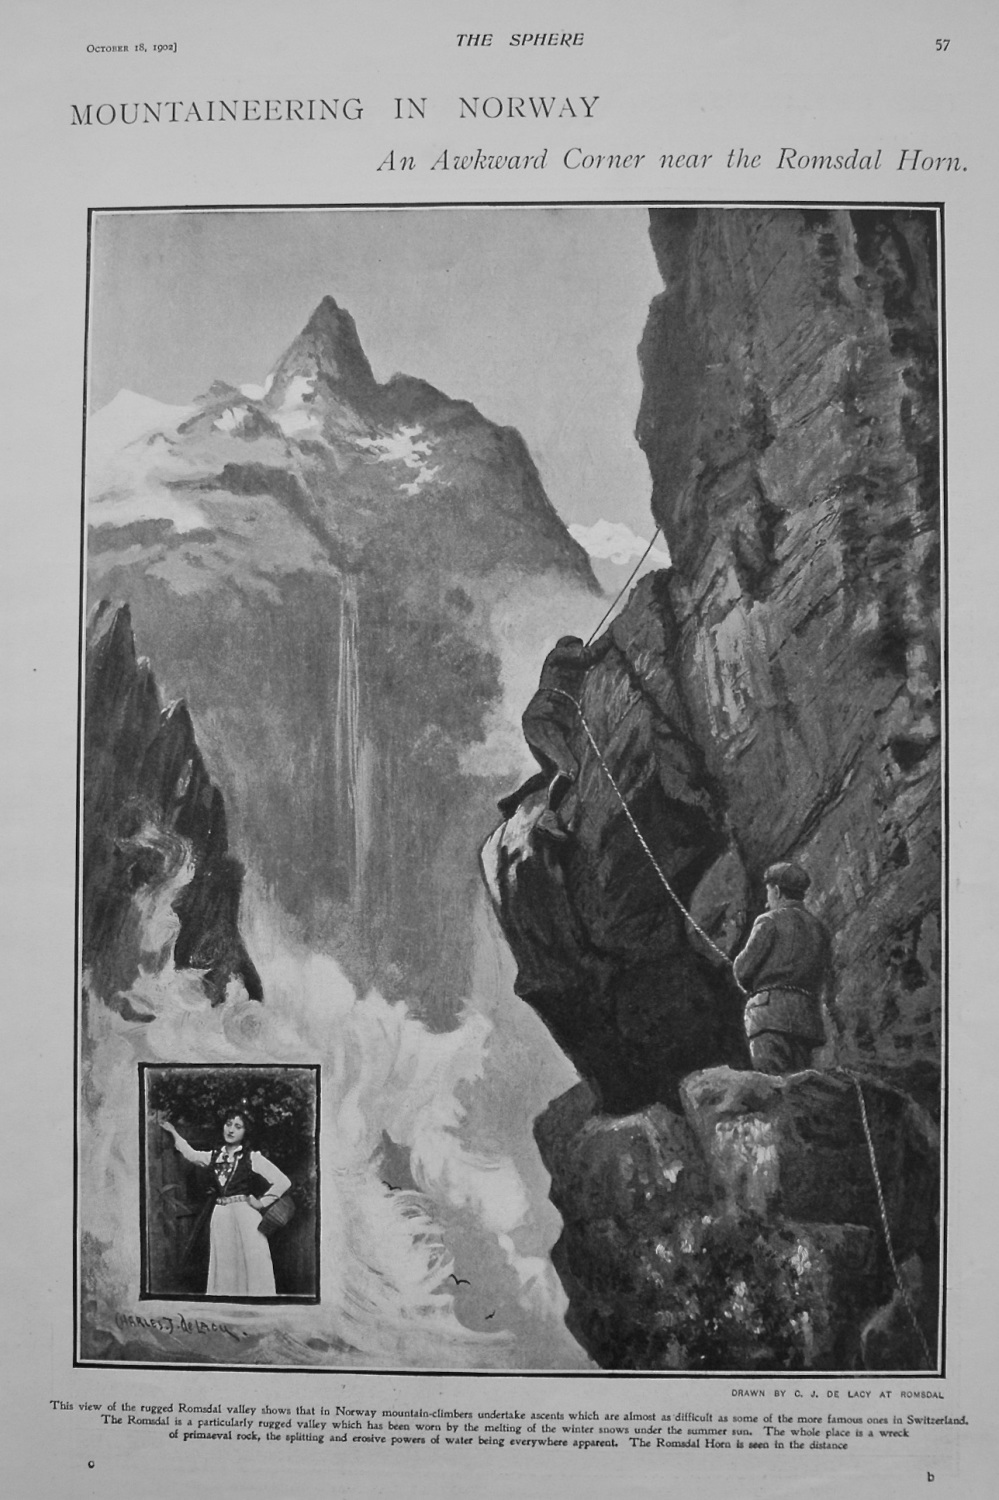 Mountaineering in Norway - An Awkward Corner near the Romsdal Horn. 1902